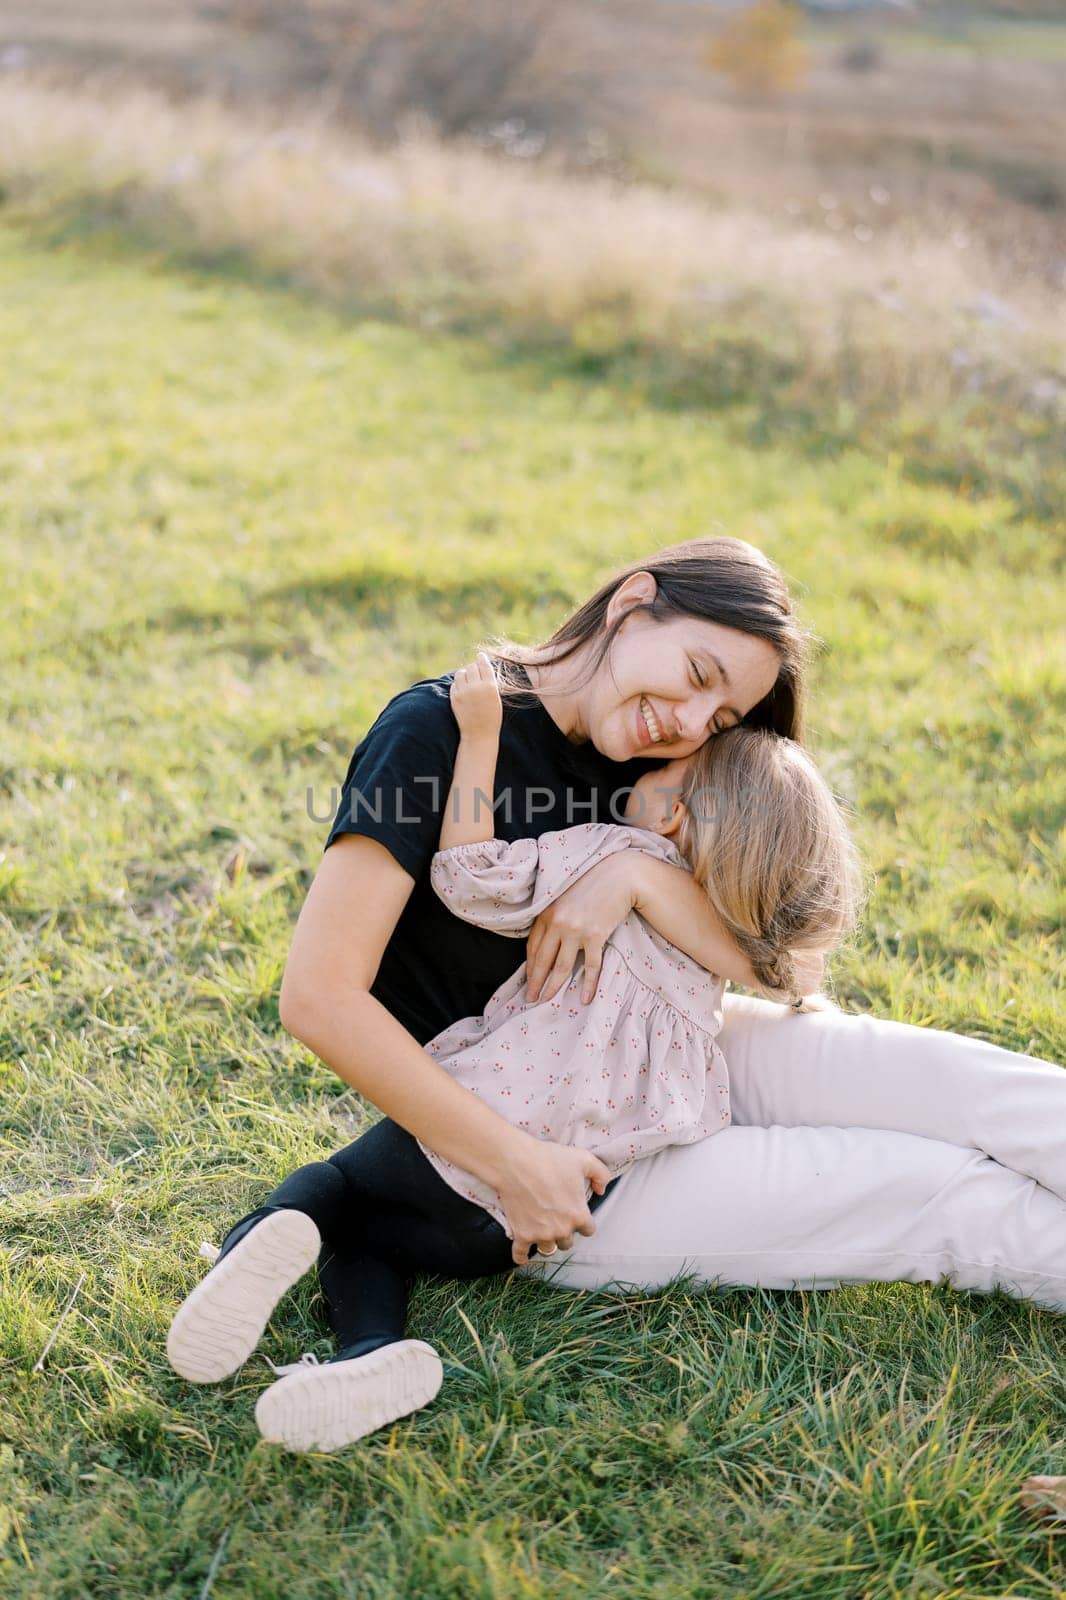 Smiling mother sitting on a green lawn hugging her little daughter. High quality photo